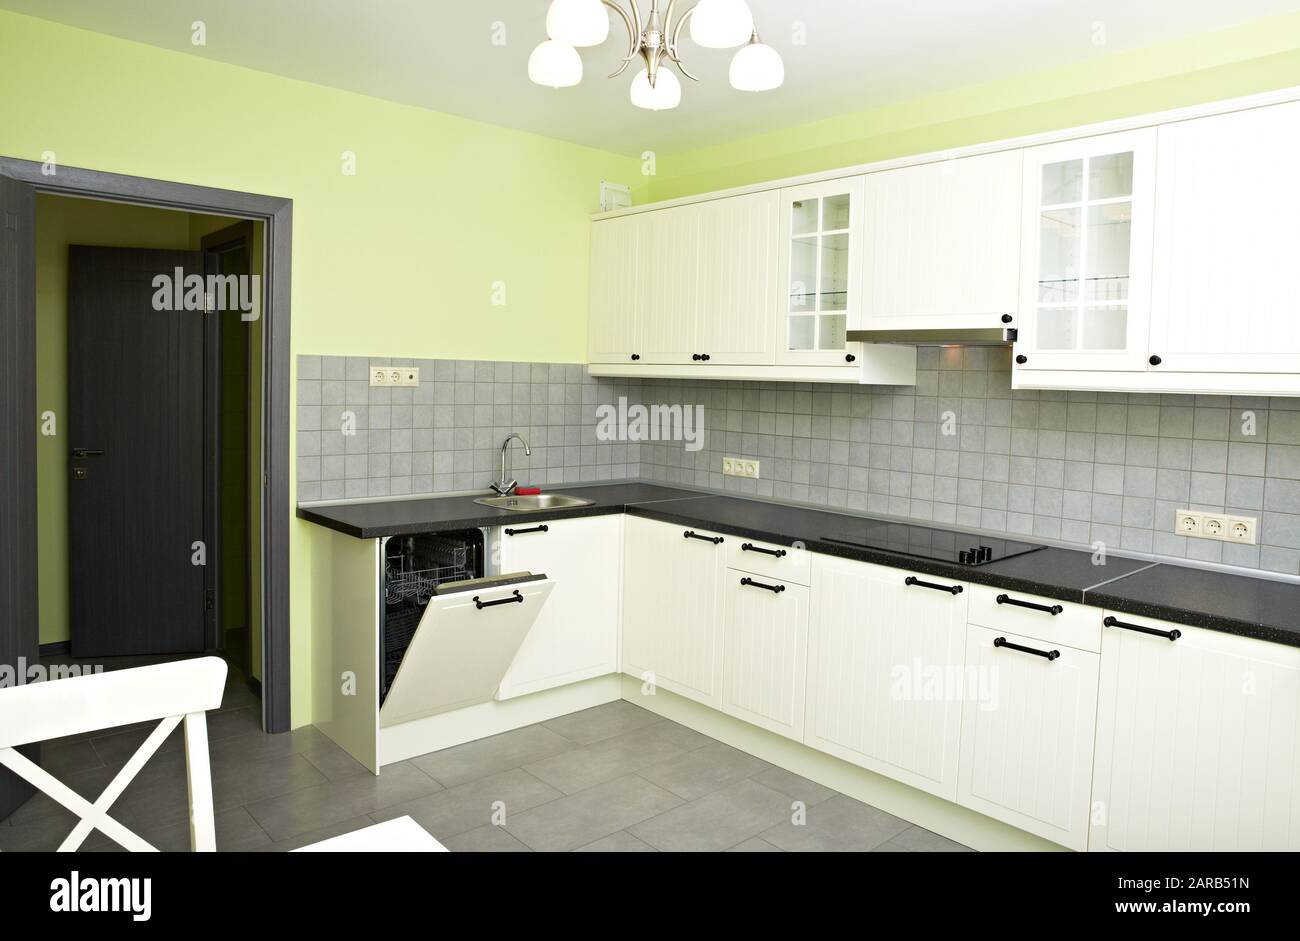 New White Small Kitchen In A Room With Green Walls Black